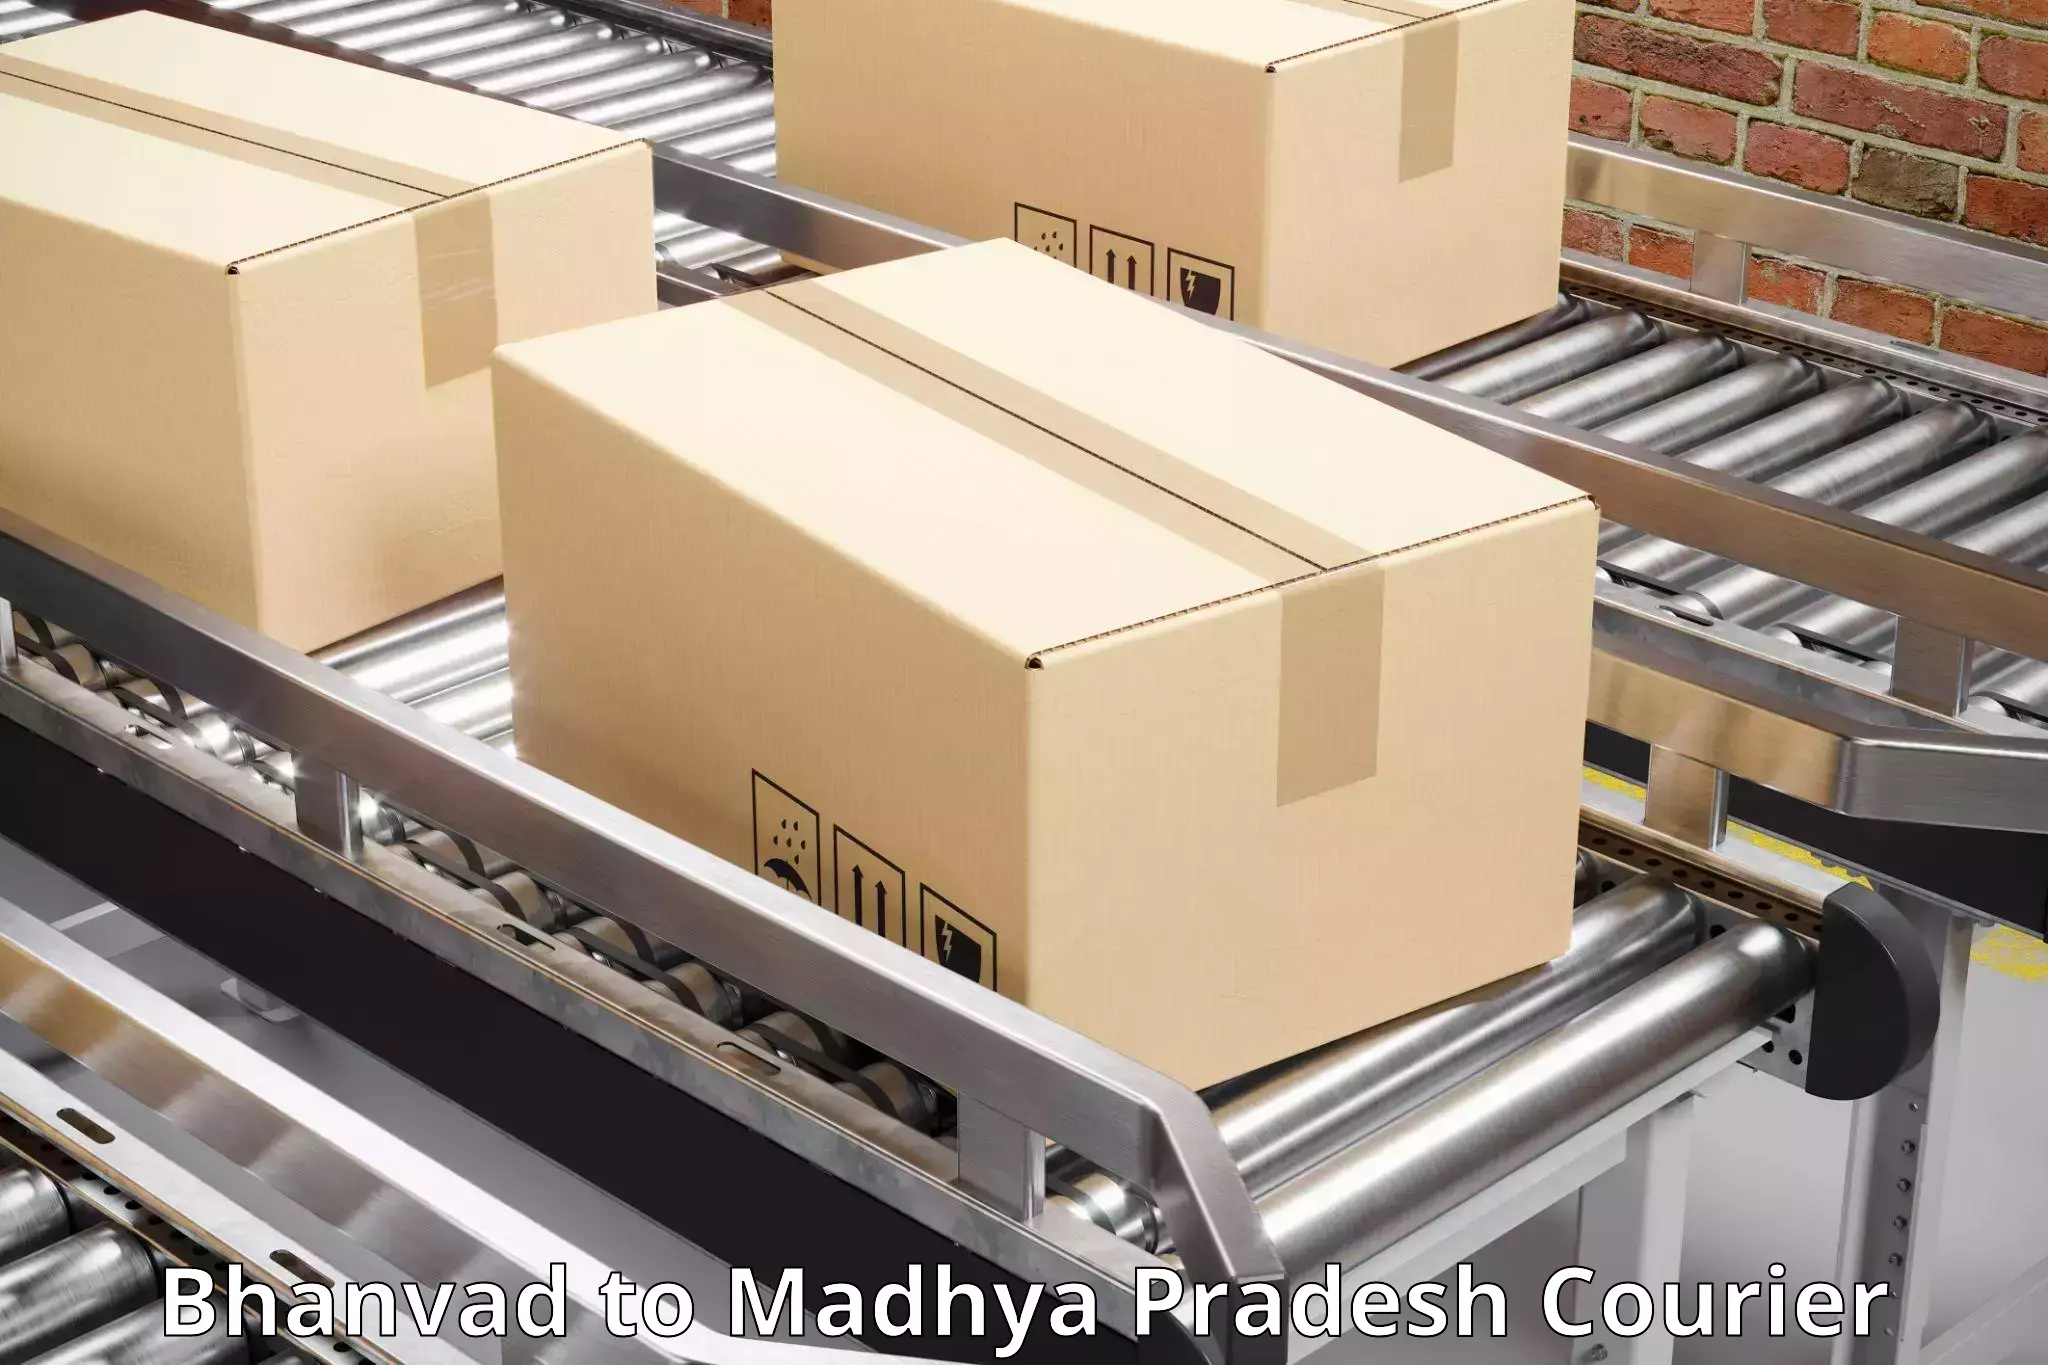 Emergency parcel delivery in Bhanvad to IIIT Bhopal